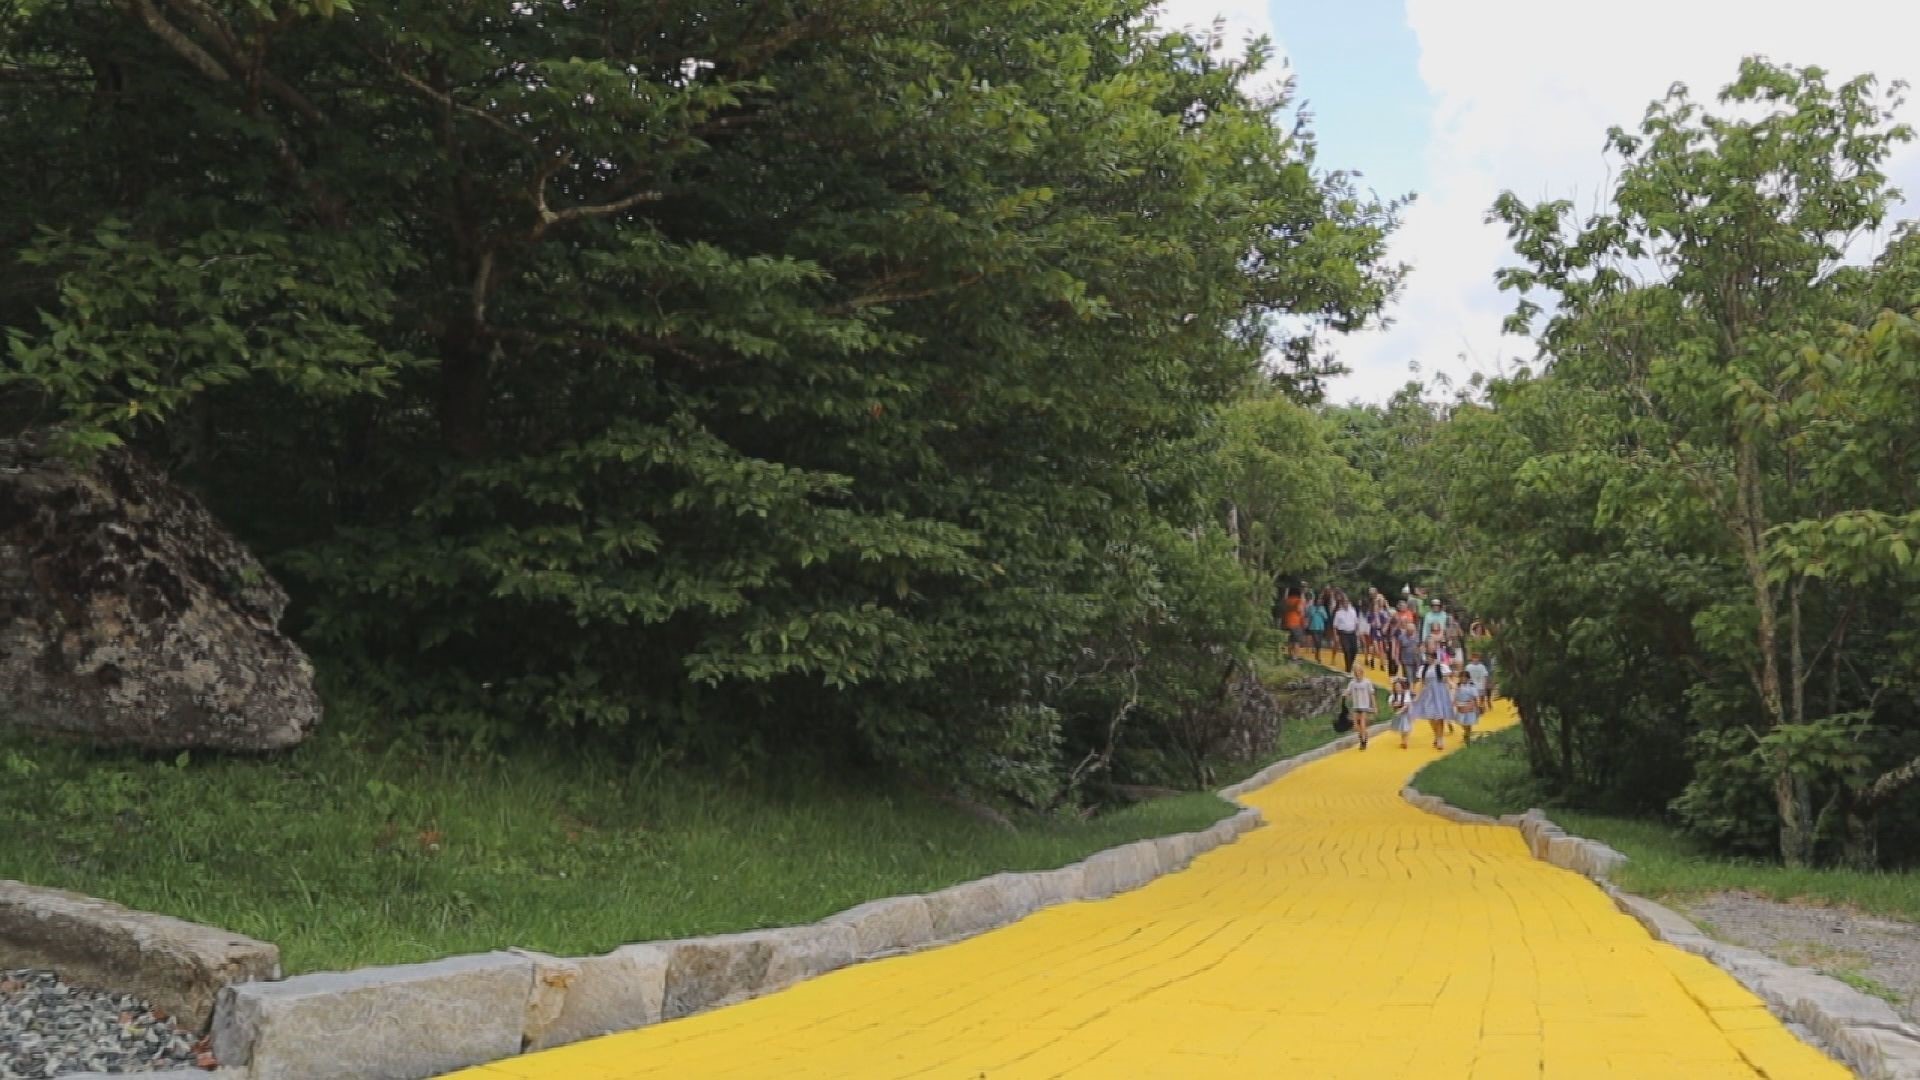 The famous "Wizard of Oz" theme park in Beech Mountain will be open every Thursday and Friday in June, and also on July 5. It's a special year for the park, because it's the 80th anniversary of "The Wizard of Oz."